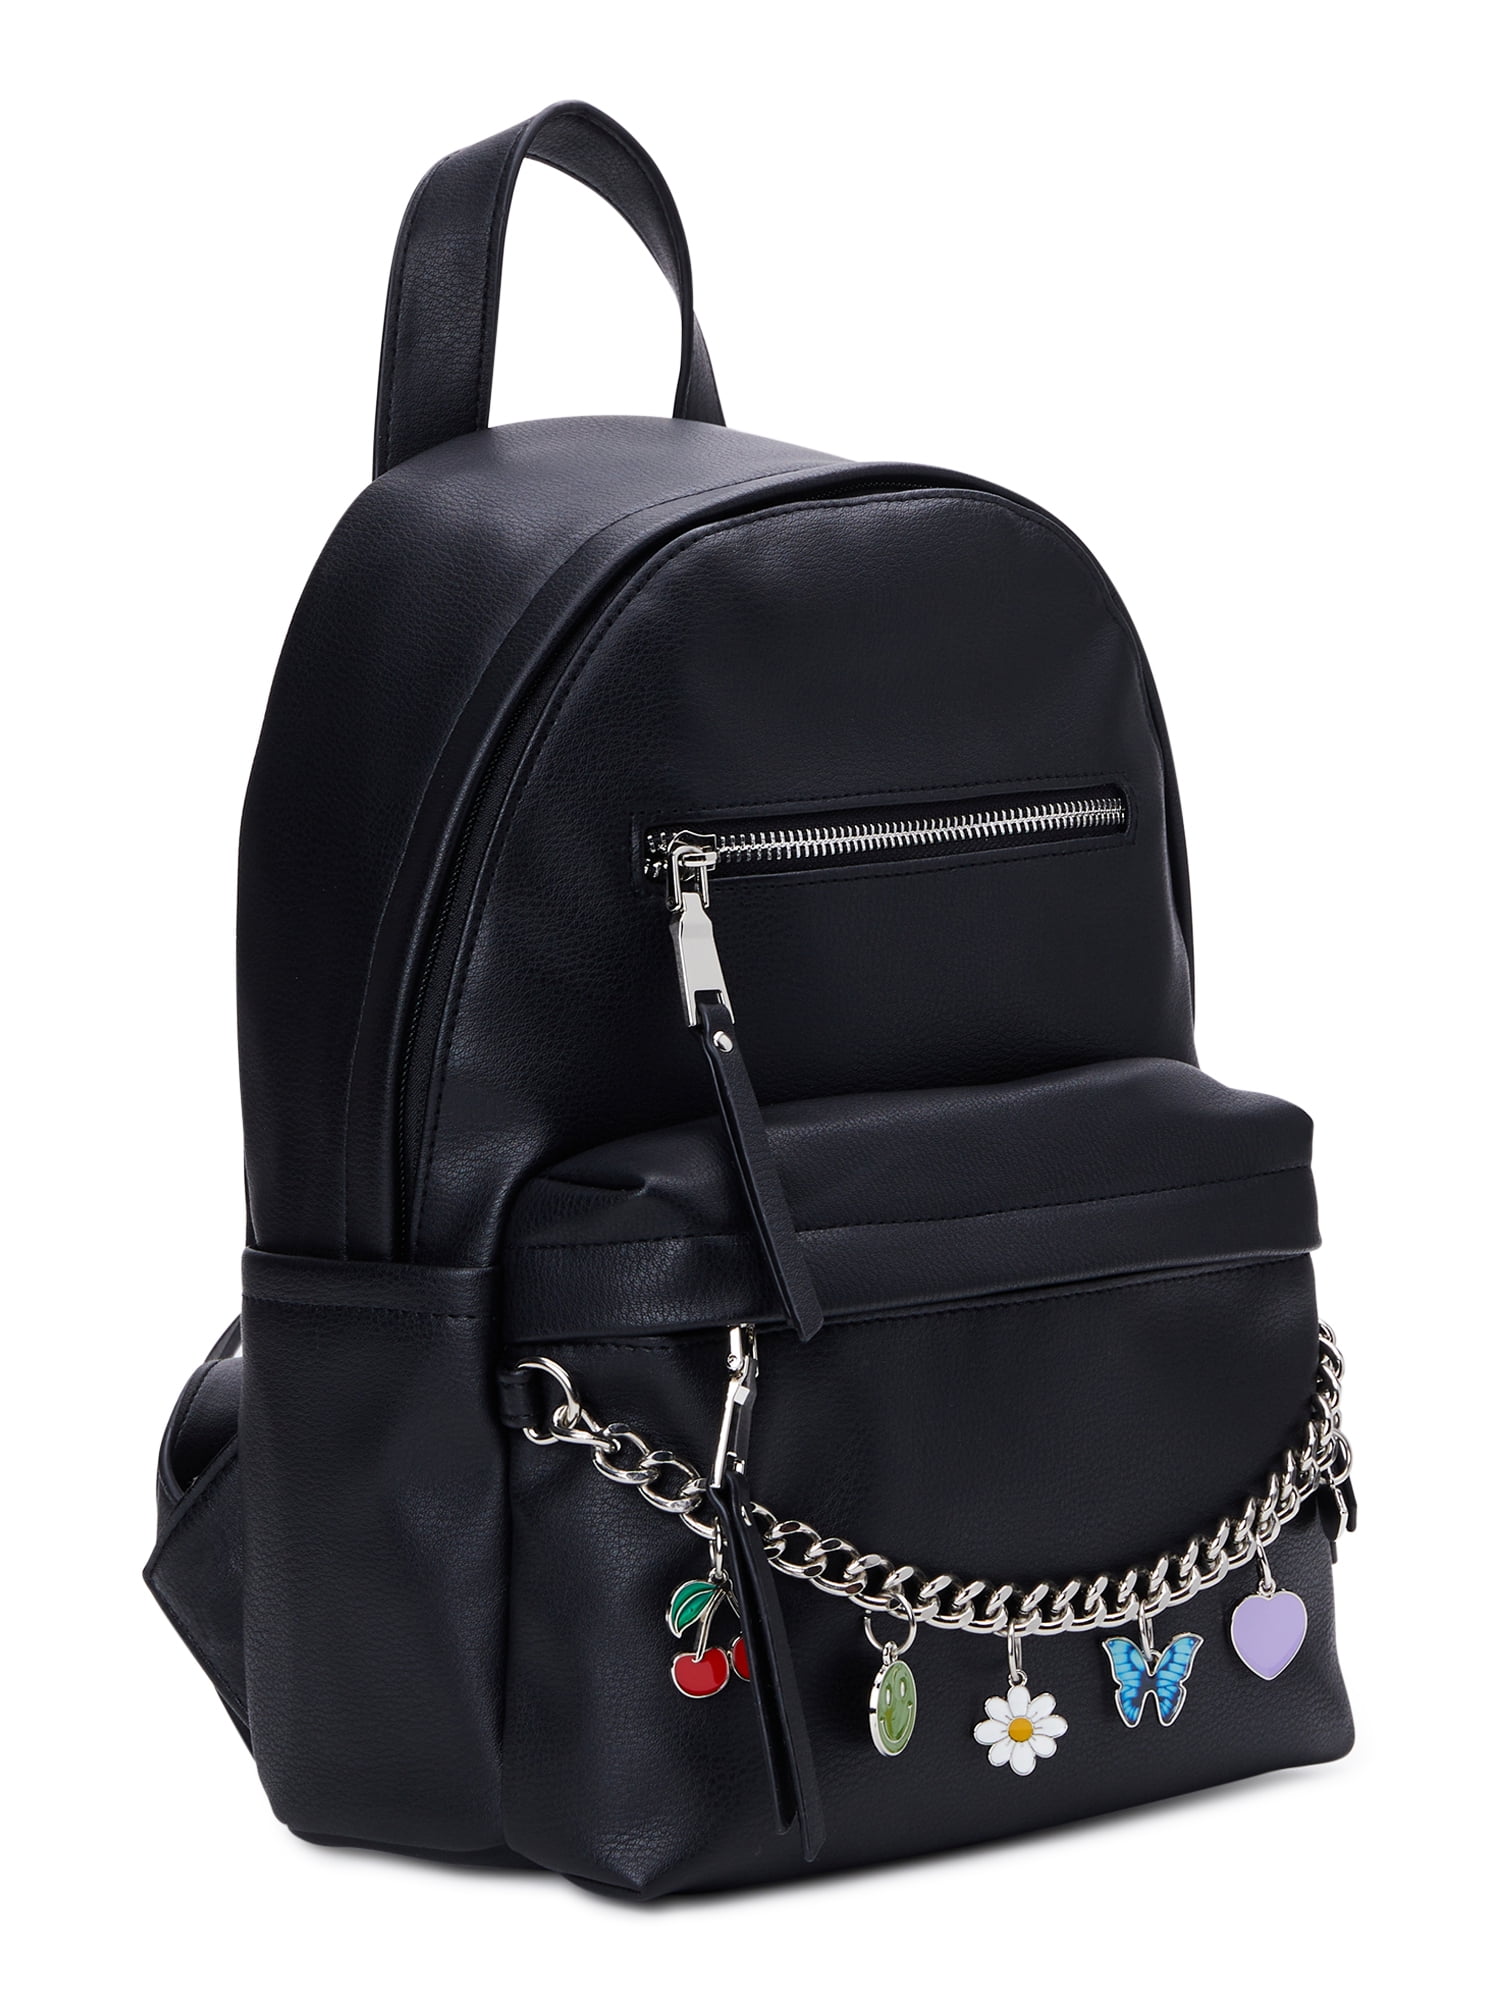 Madden NYC Women's Charm Pouch Mini Backpack Black